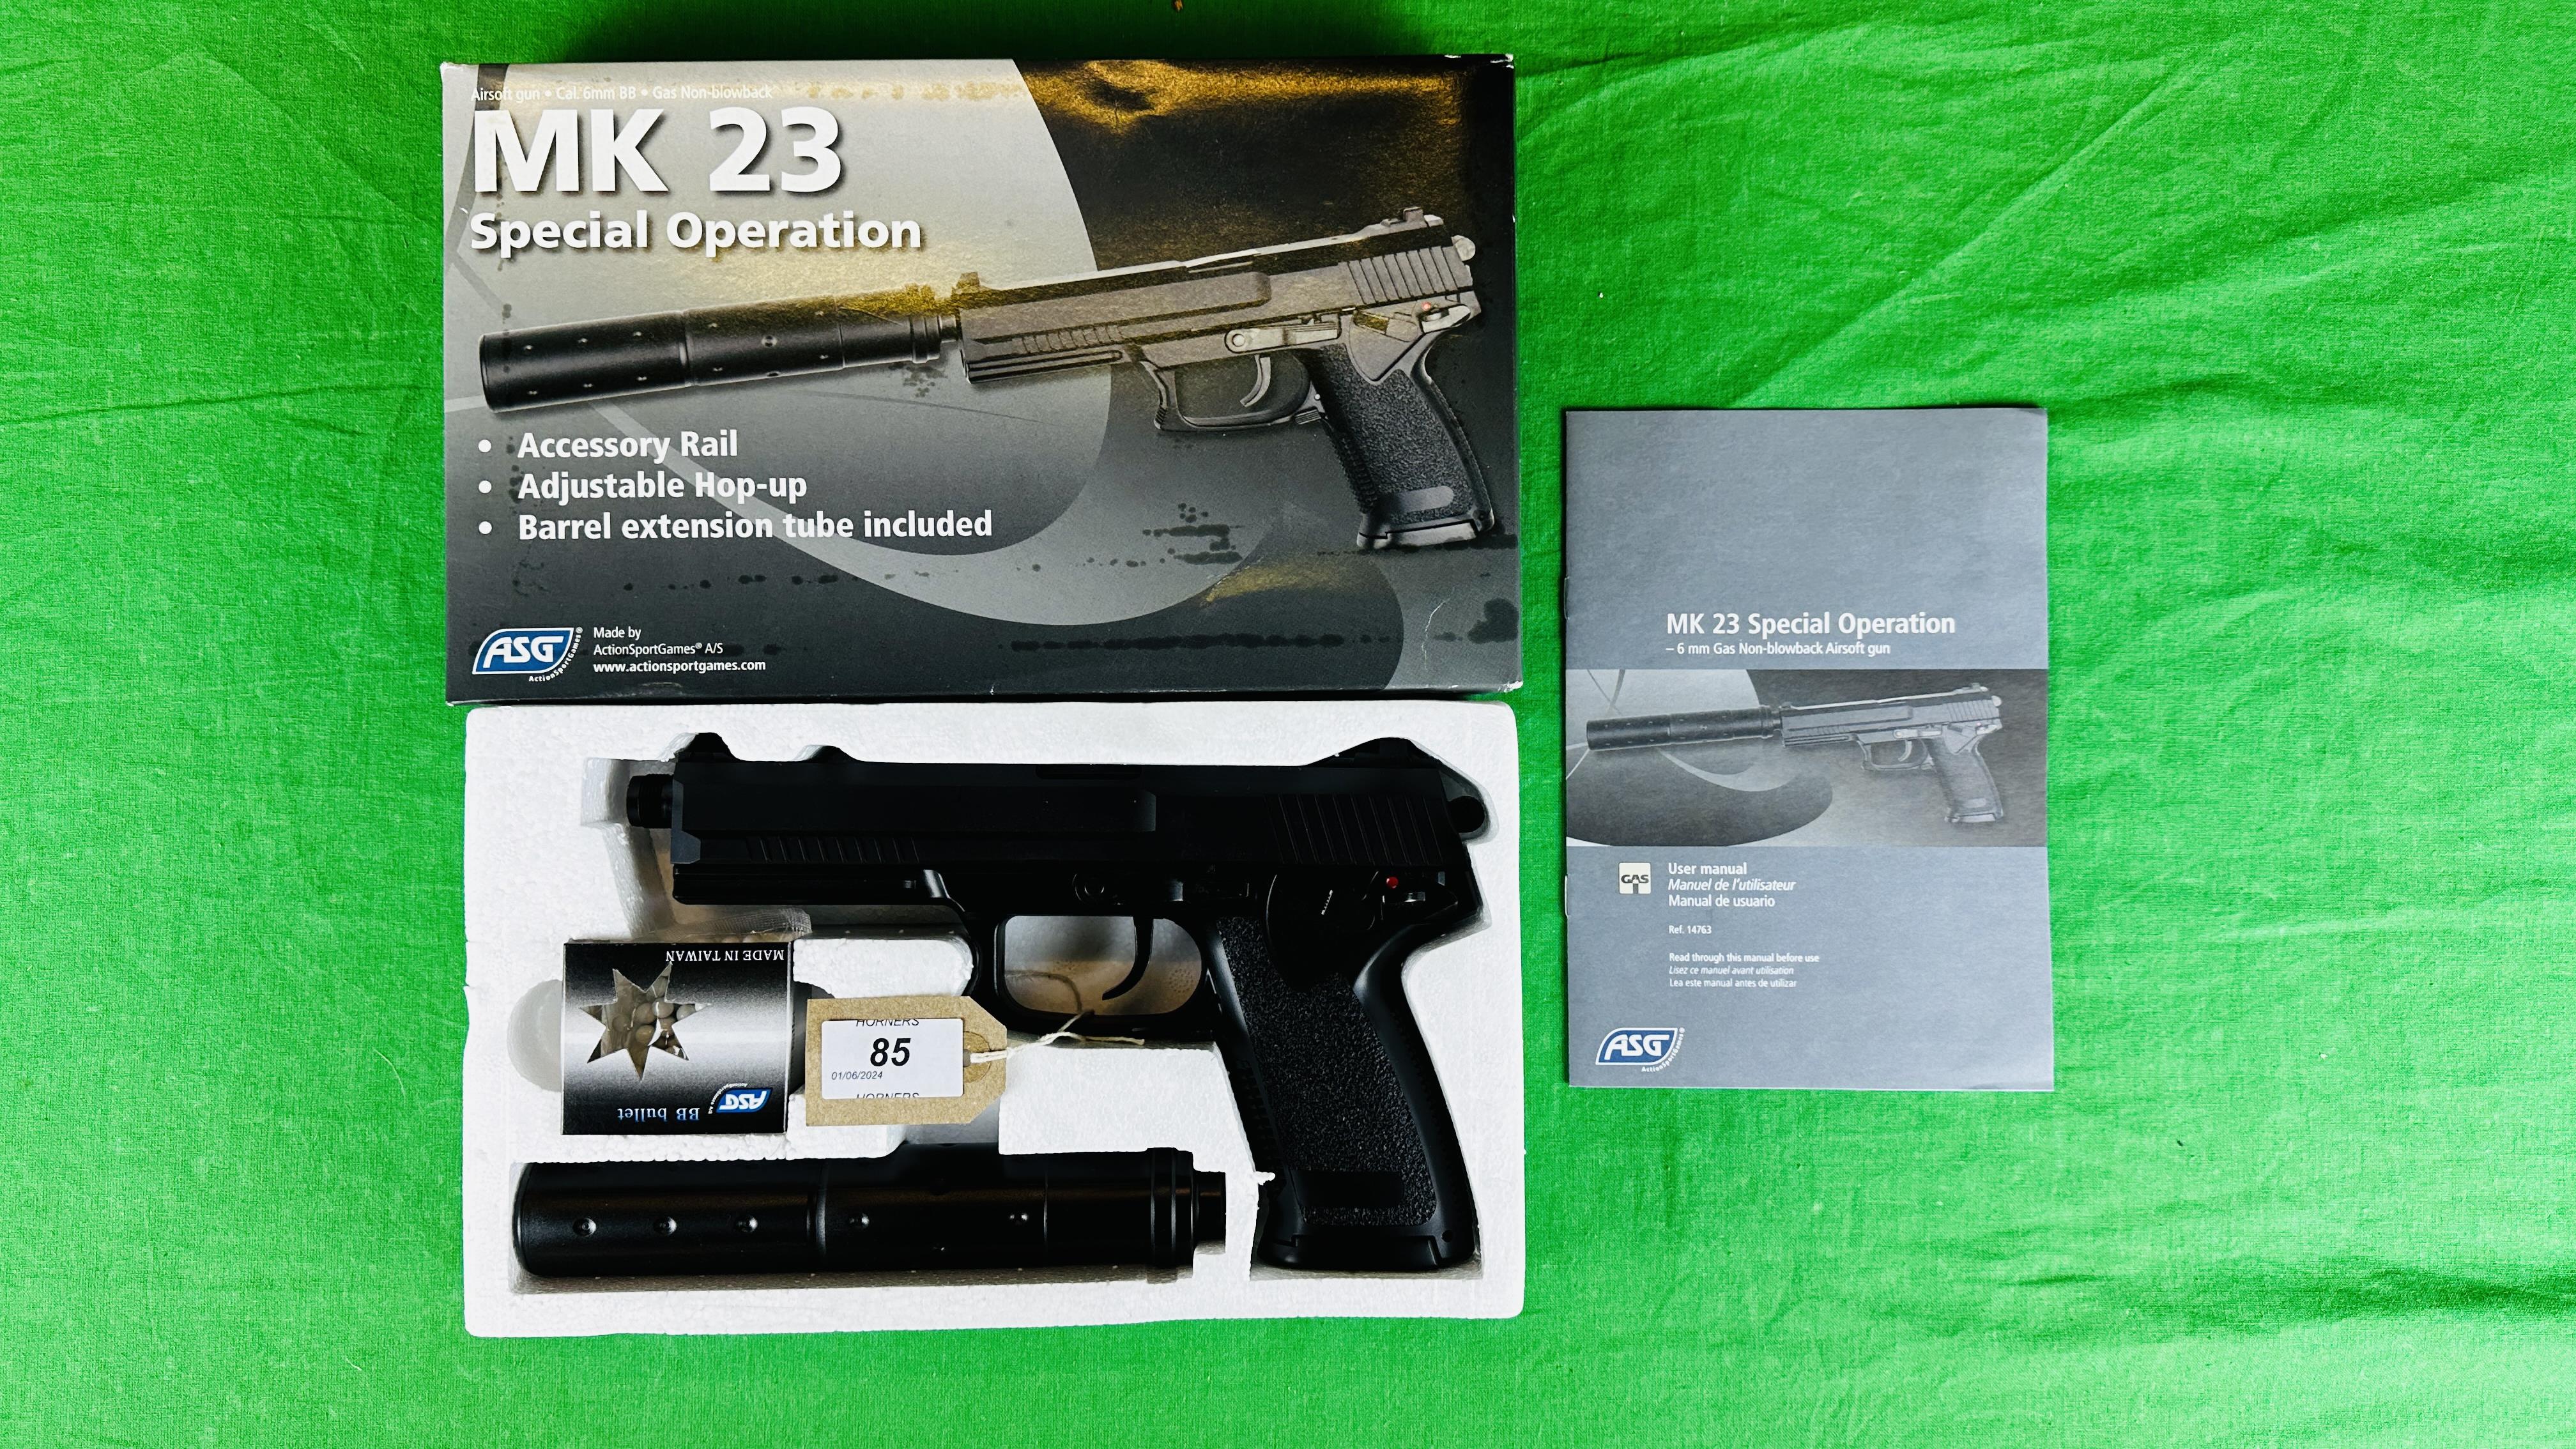 ASG MK23 SPECIAL OPERATION 6MM BB GAS NON-BLOWBACK AIR PISTOL BOXED WITH ACCESSORIES - (ALL GUNS TO